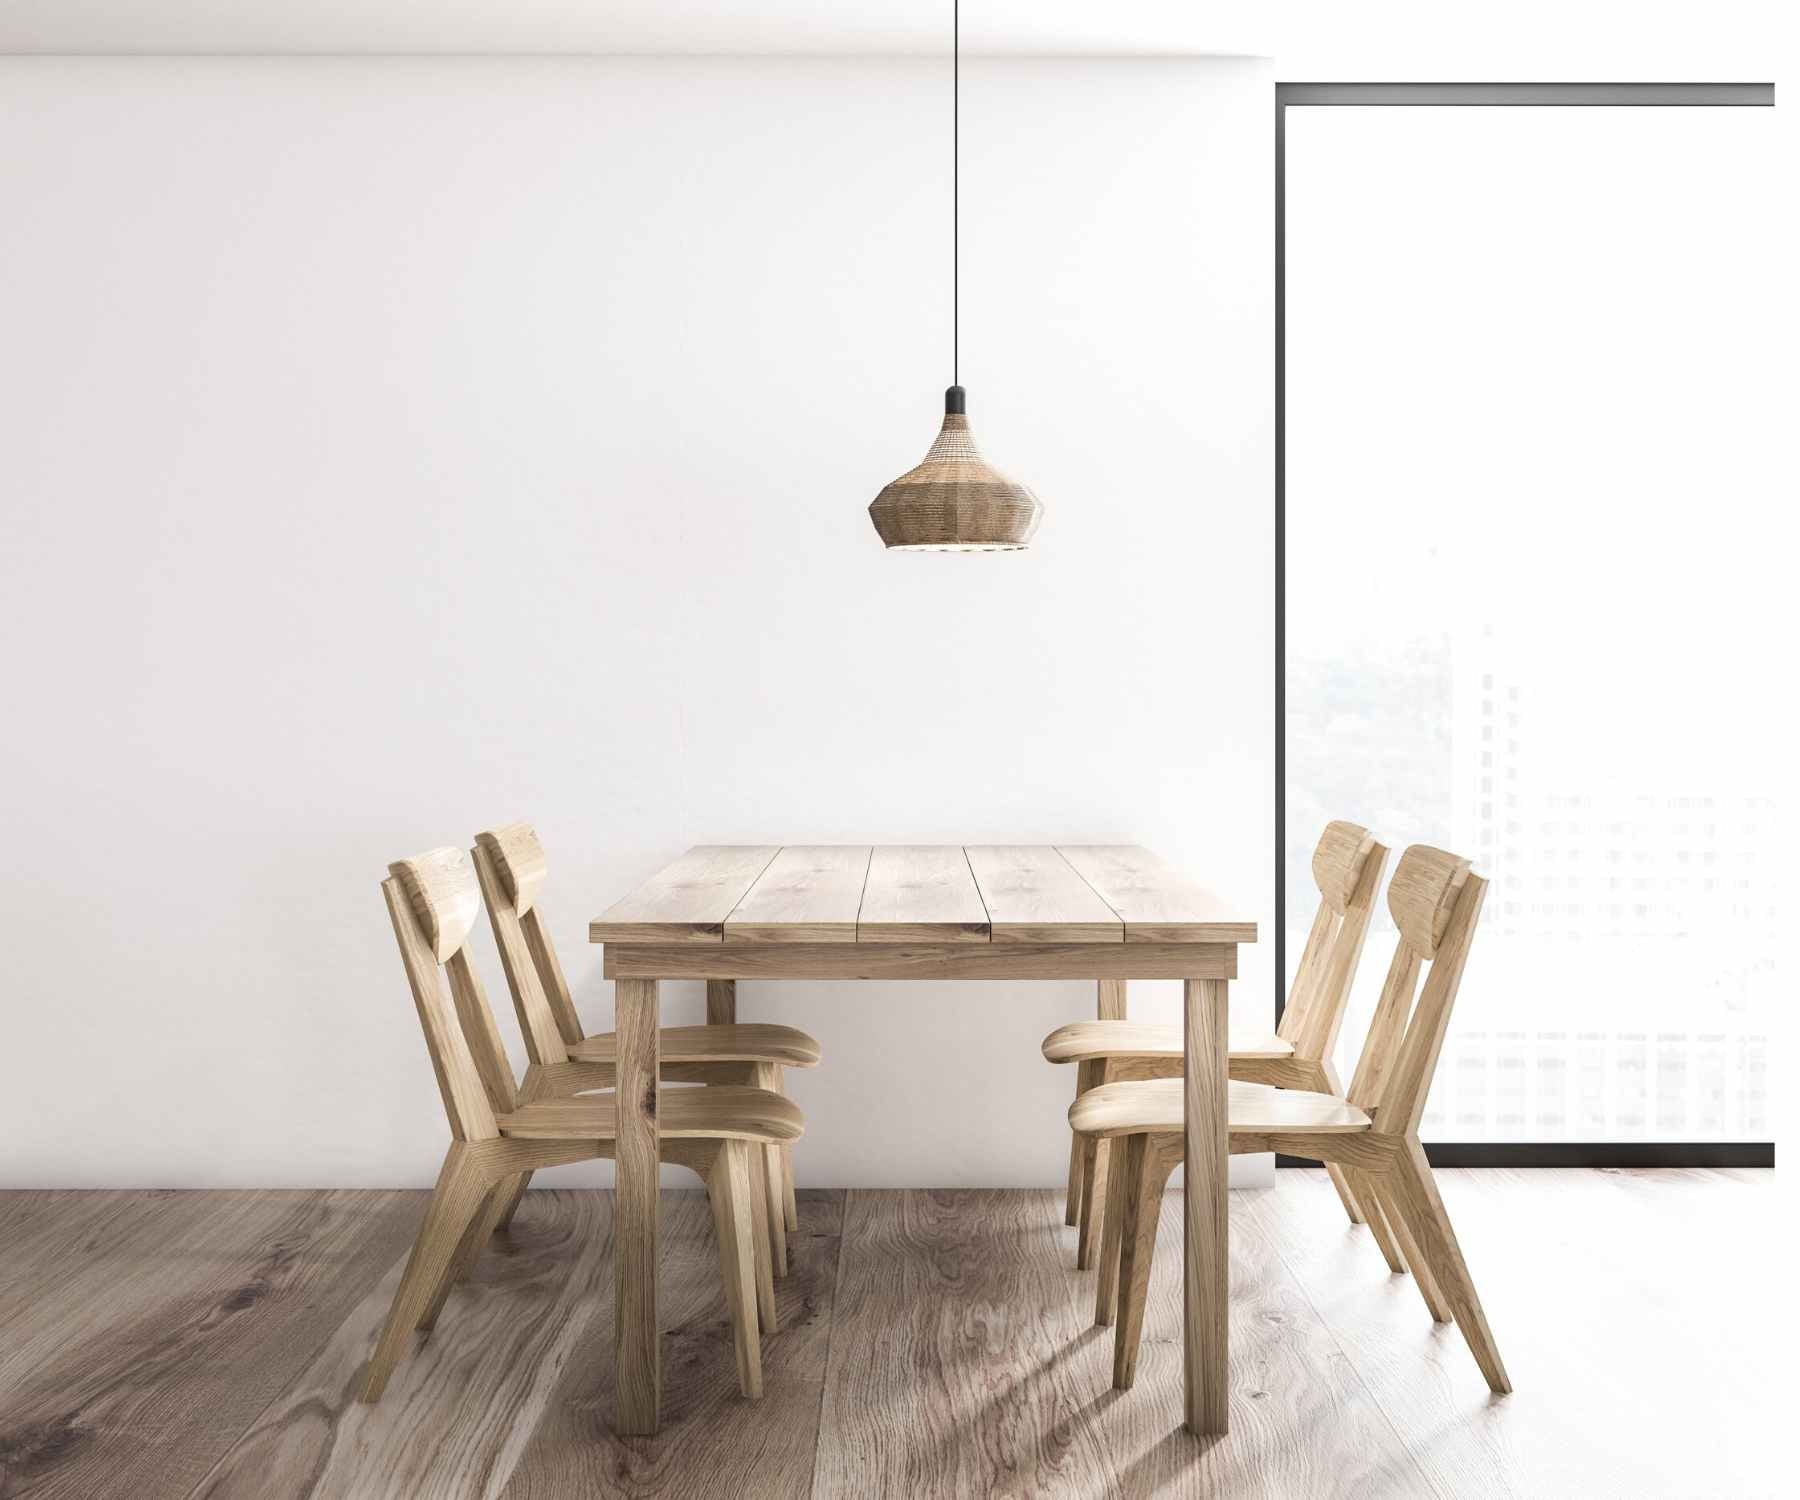 Wooden dining table and chairs in white minimalist room with pendant light